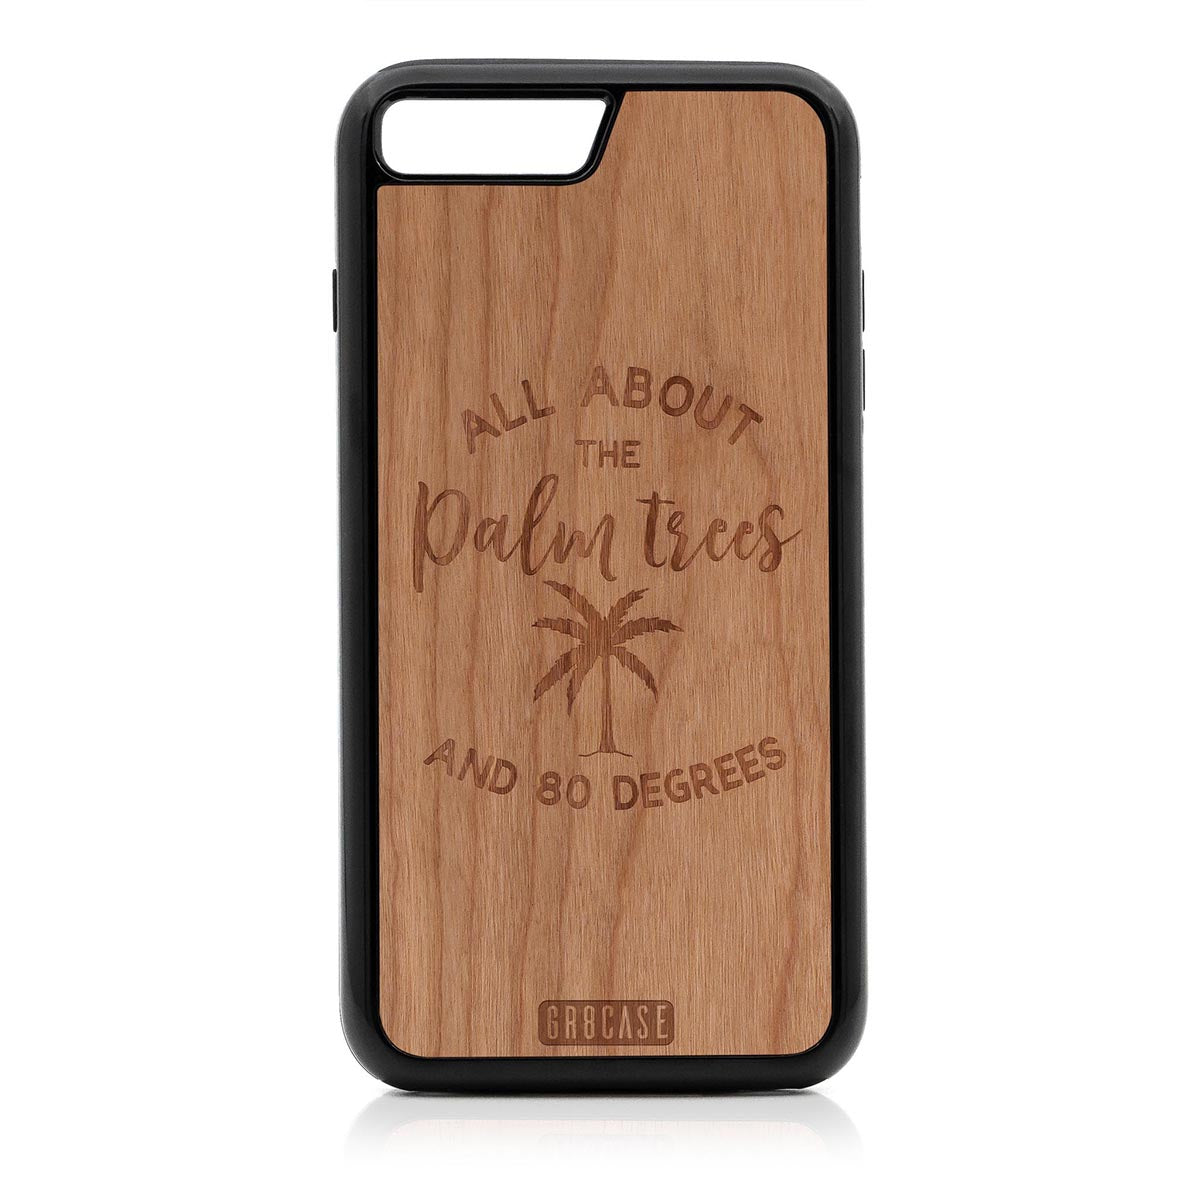 All About The Palm Trees and 80 Degrees Design Wood Case For iPhone 7 Plus / 8 Plus by GR8CASE